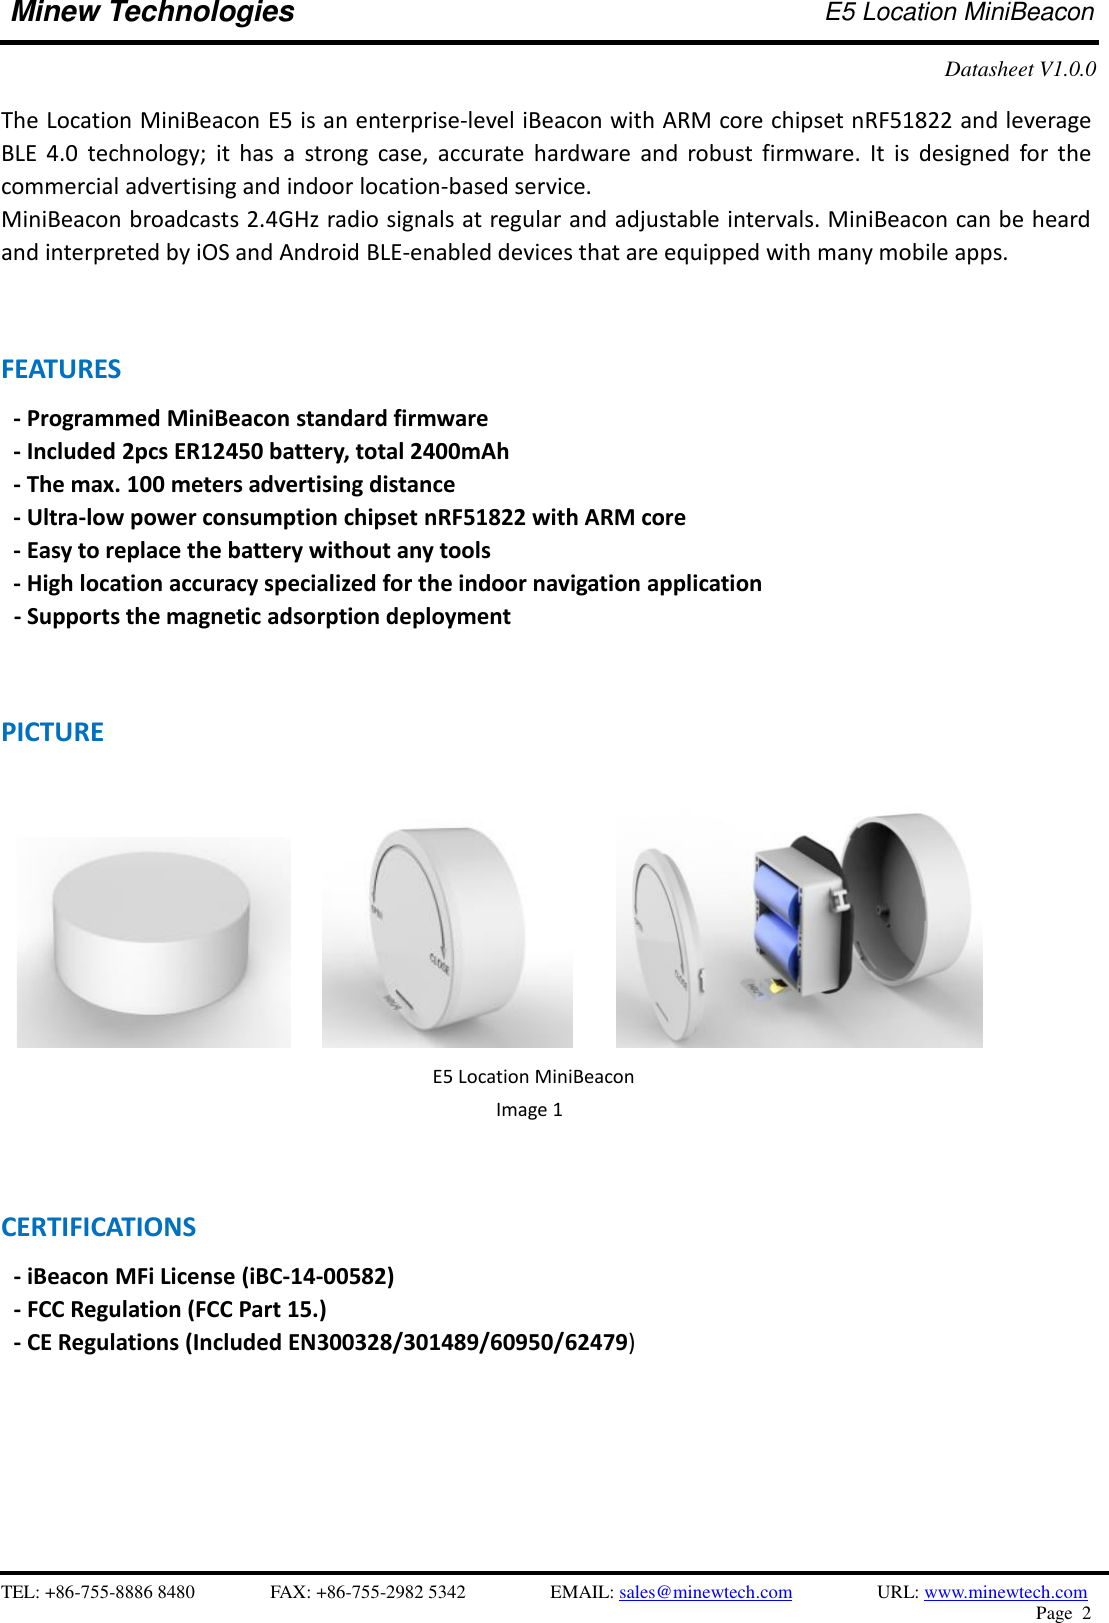    TEL: +86-755-8886 8480              FAX: +86-755-2982 5342              EMAIL: sales@minewtech.com           URL: www.minewtech.com Page  2  Minew Technologies E5 Location MiniBeacon   Datasheet V1.0.0    The Location MiniBeacon E5 is an enterprise-level iBeacon with ARM core chipset nRF51822 and leverage BLE  4.0  technology;  it  has a  strong case,  accurate  hardware  and  robust  firmware. It  is  designed  for the commercial advertising and indoor location-based service. MiniBeacon broadcasts 2.4GHz radio signals at regular and adjustable intervals. MiniBeacon can be heard and interpreted by iOS and Android BLE-enabled devices that are equipped with many mobile apps.   FEATURES   - Programmed MiniBeacon standard firmware   - Included 2pcs ER12450 battery, total 2400mAh - The max. 100 meters advertising distance - Ultra-low power consumption chipset nRF51822 with ARM core - Easy to replace the battery without any tools - High location accuracy specialized for the indoor navigation application   - Supports the magnetic adsorption deployment   PICTURE              CERTIFICATIONS - iBeacon MFi License (iBC-14-00582)   - FCC Regulation (FCC Part 15.) - CE Regulations (Included EN300328/301489/60950/62479)                                                       E5 Location MiniBeacon Image 1   